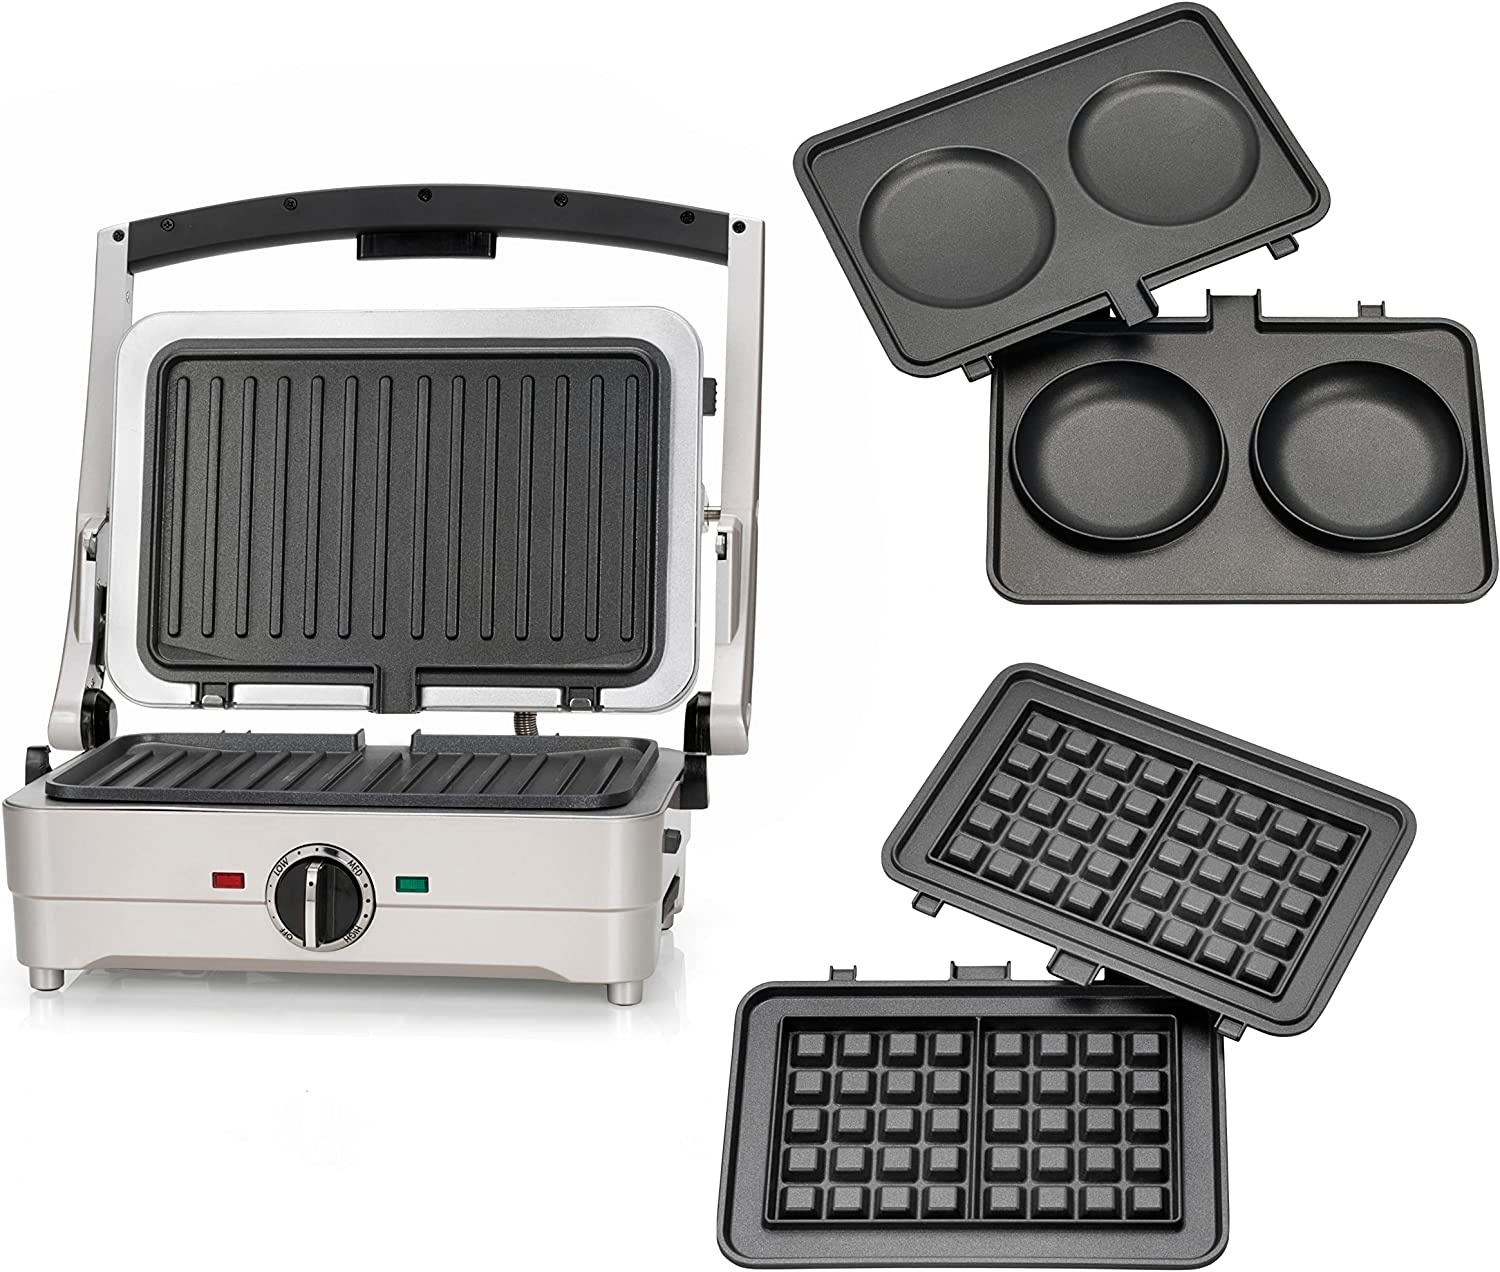 Cuisinart Grill, Waffle & Omelette Maker, Contact Grill, Waffle Iron, Table Grill with Interchangeable Plates, Non-Stick Coating, Compact, Silver, GRSM3E Frosted Pearl